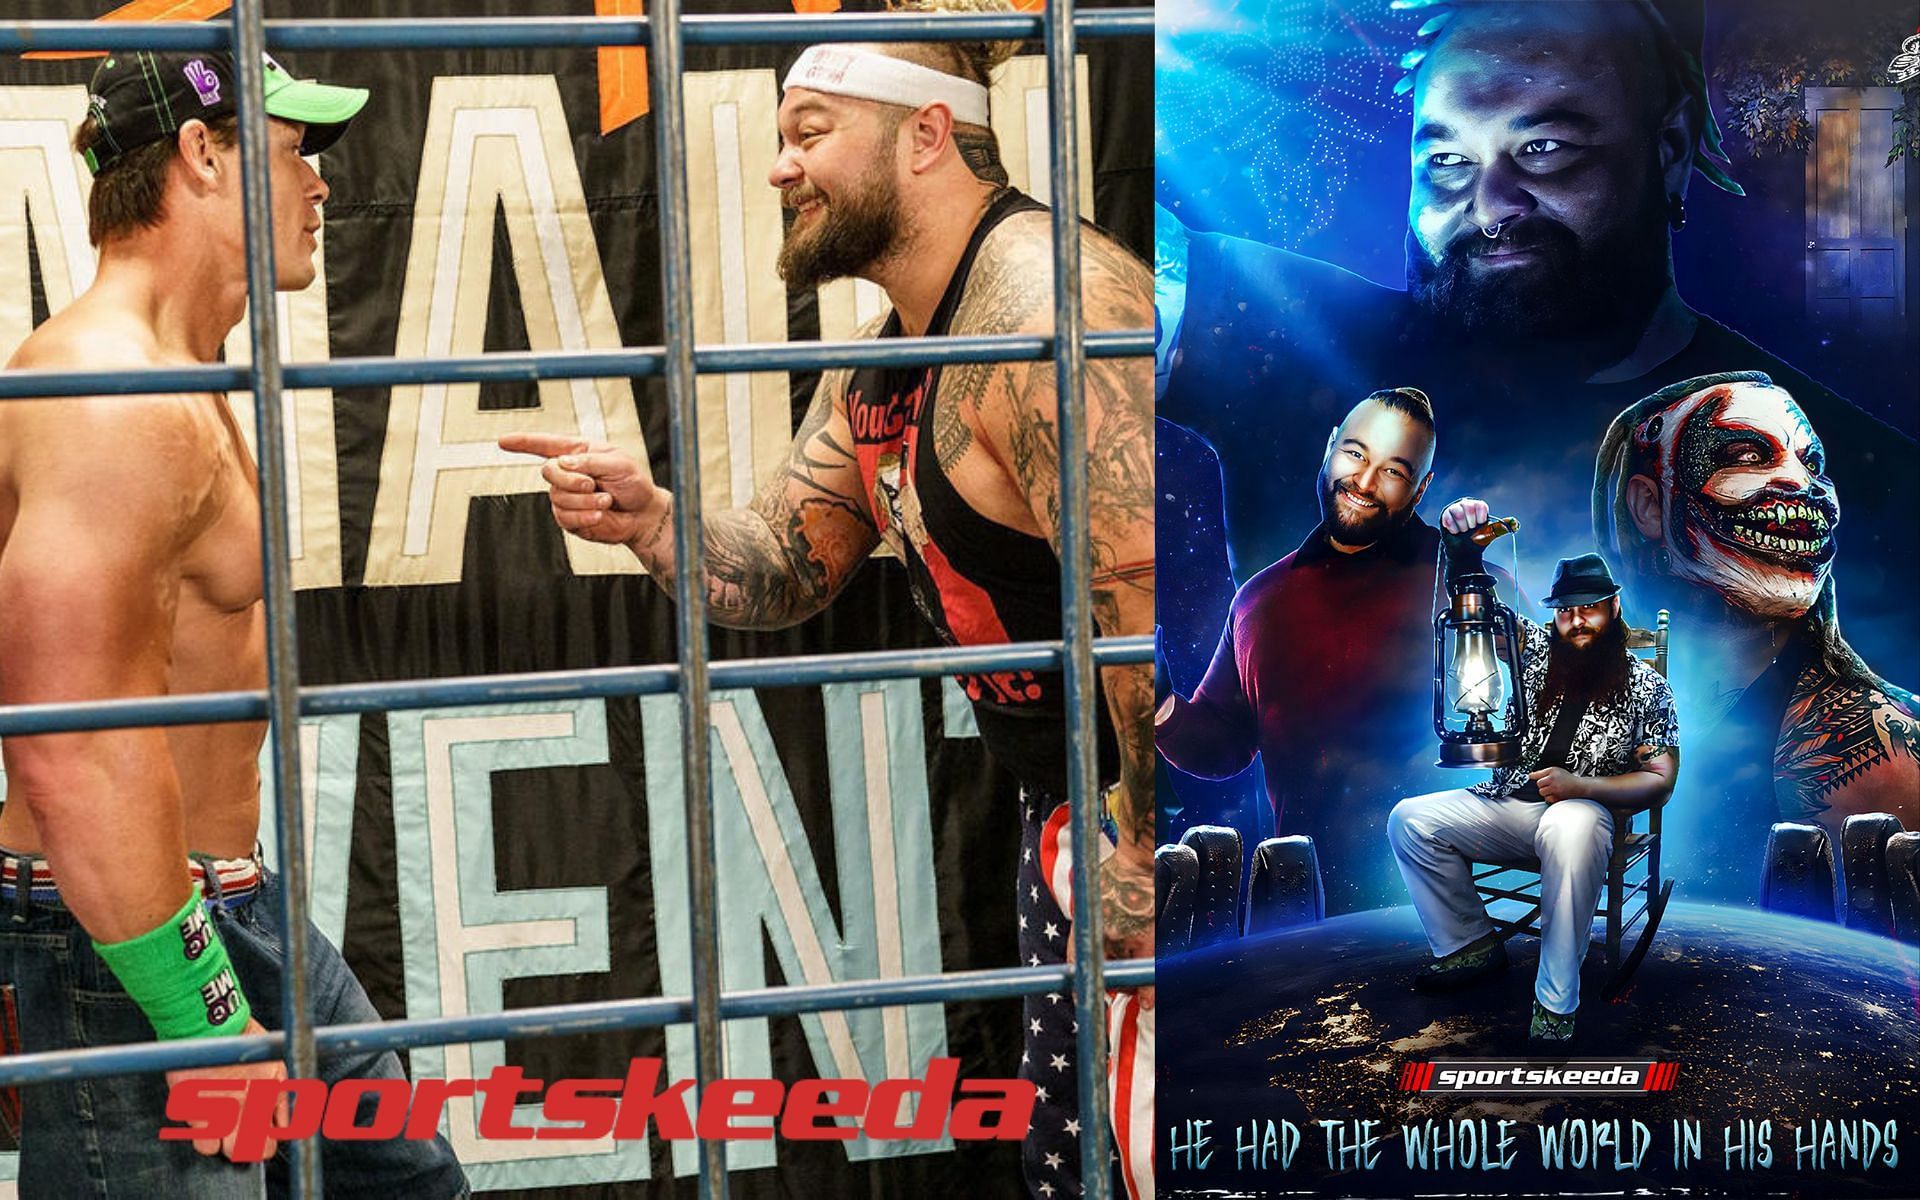 There will never be another Bray Wyatt...